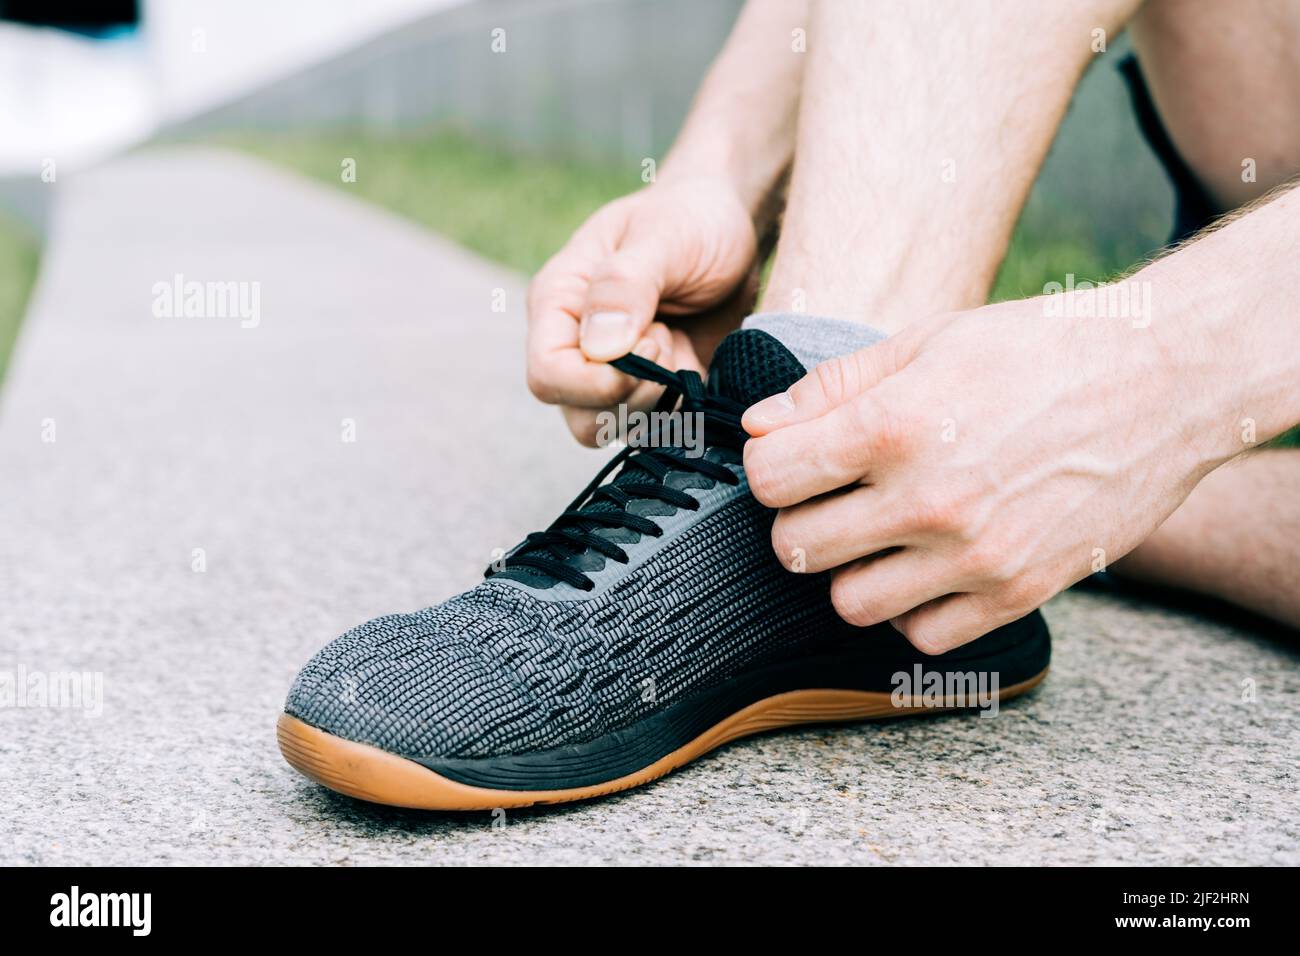 Close up sports man tying shoelace while running outdoors Stock Photo